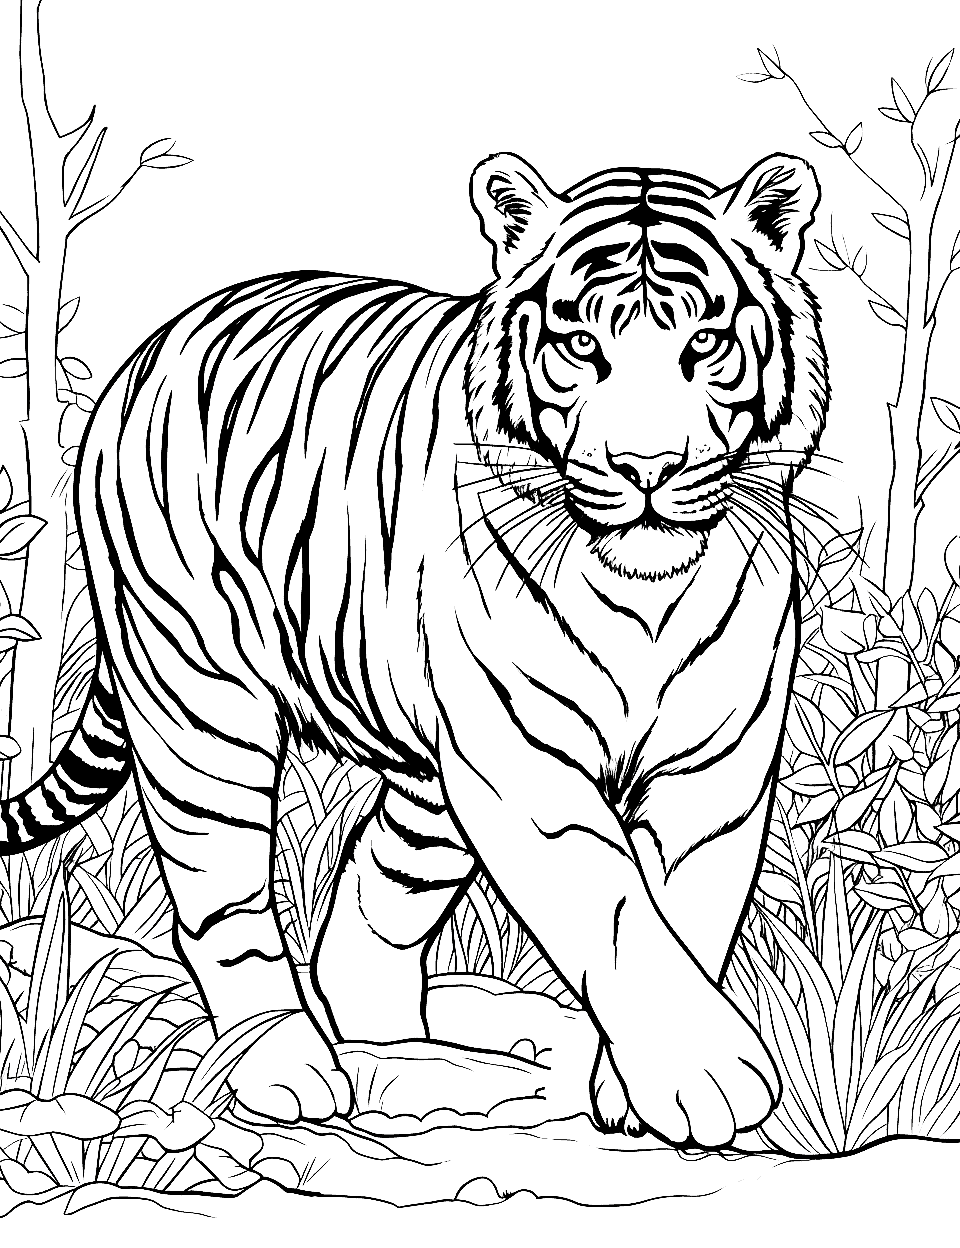 Forest Explorer Tiger Coloring Page - A tiger stealthily moving through the dense forest undergrowth.